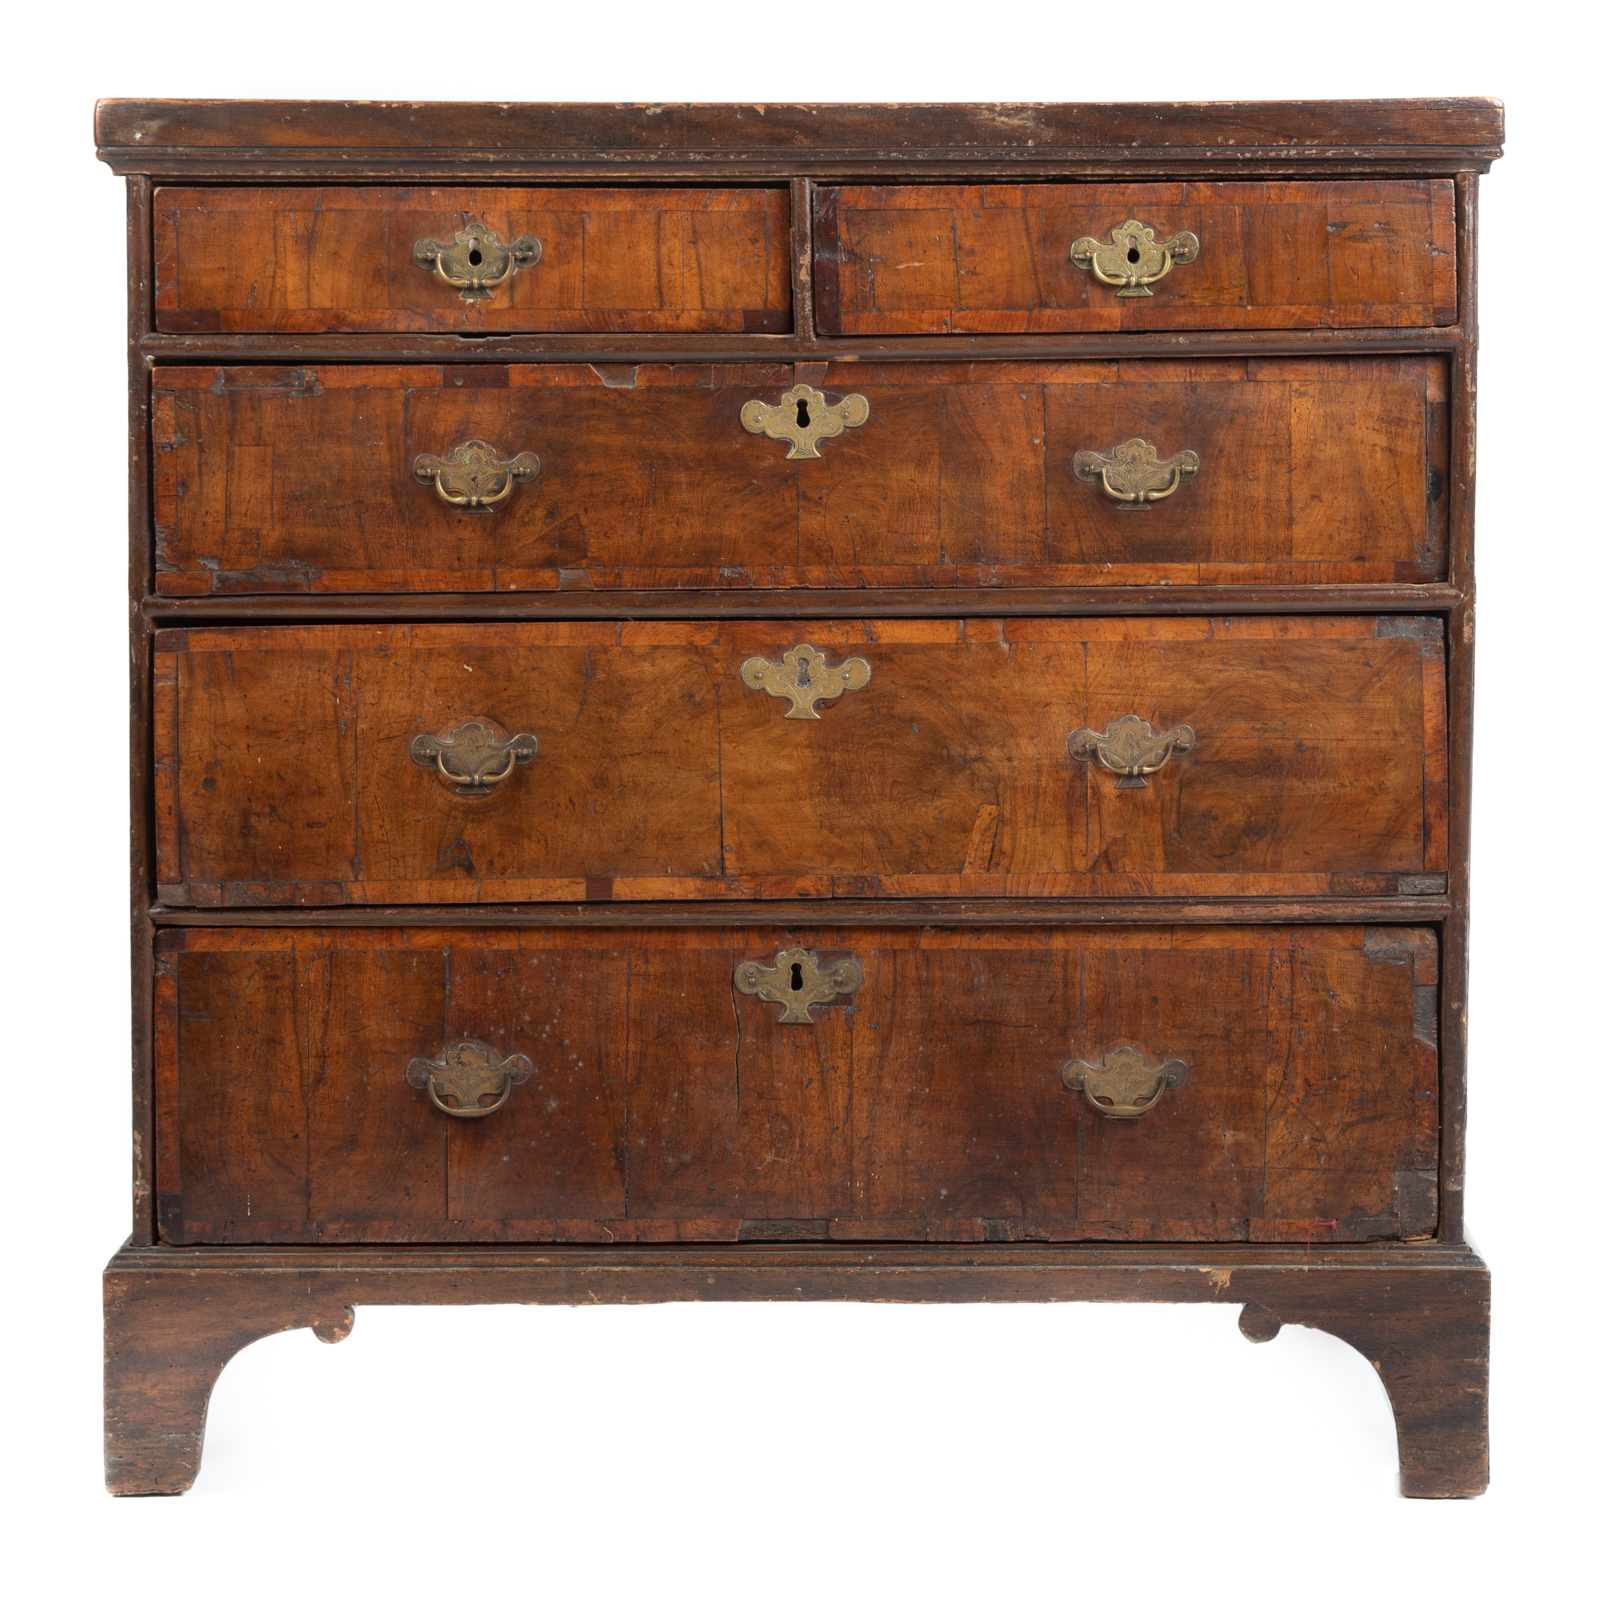 QUEEN ANNE MIXED WOOD CHEST OF